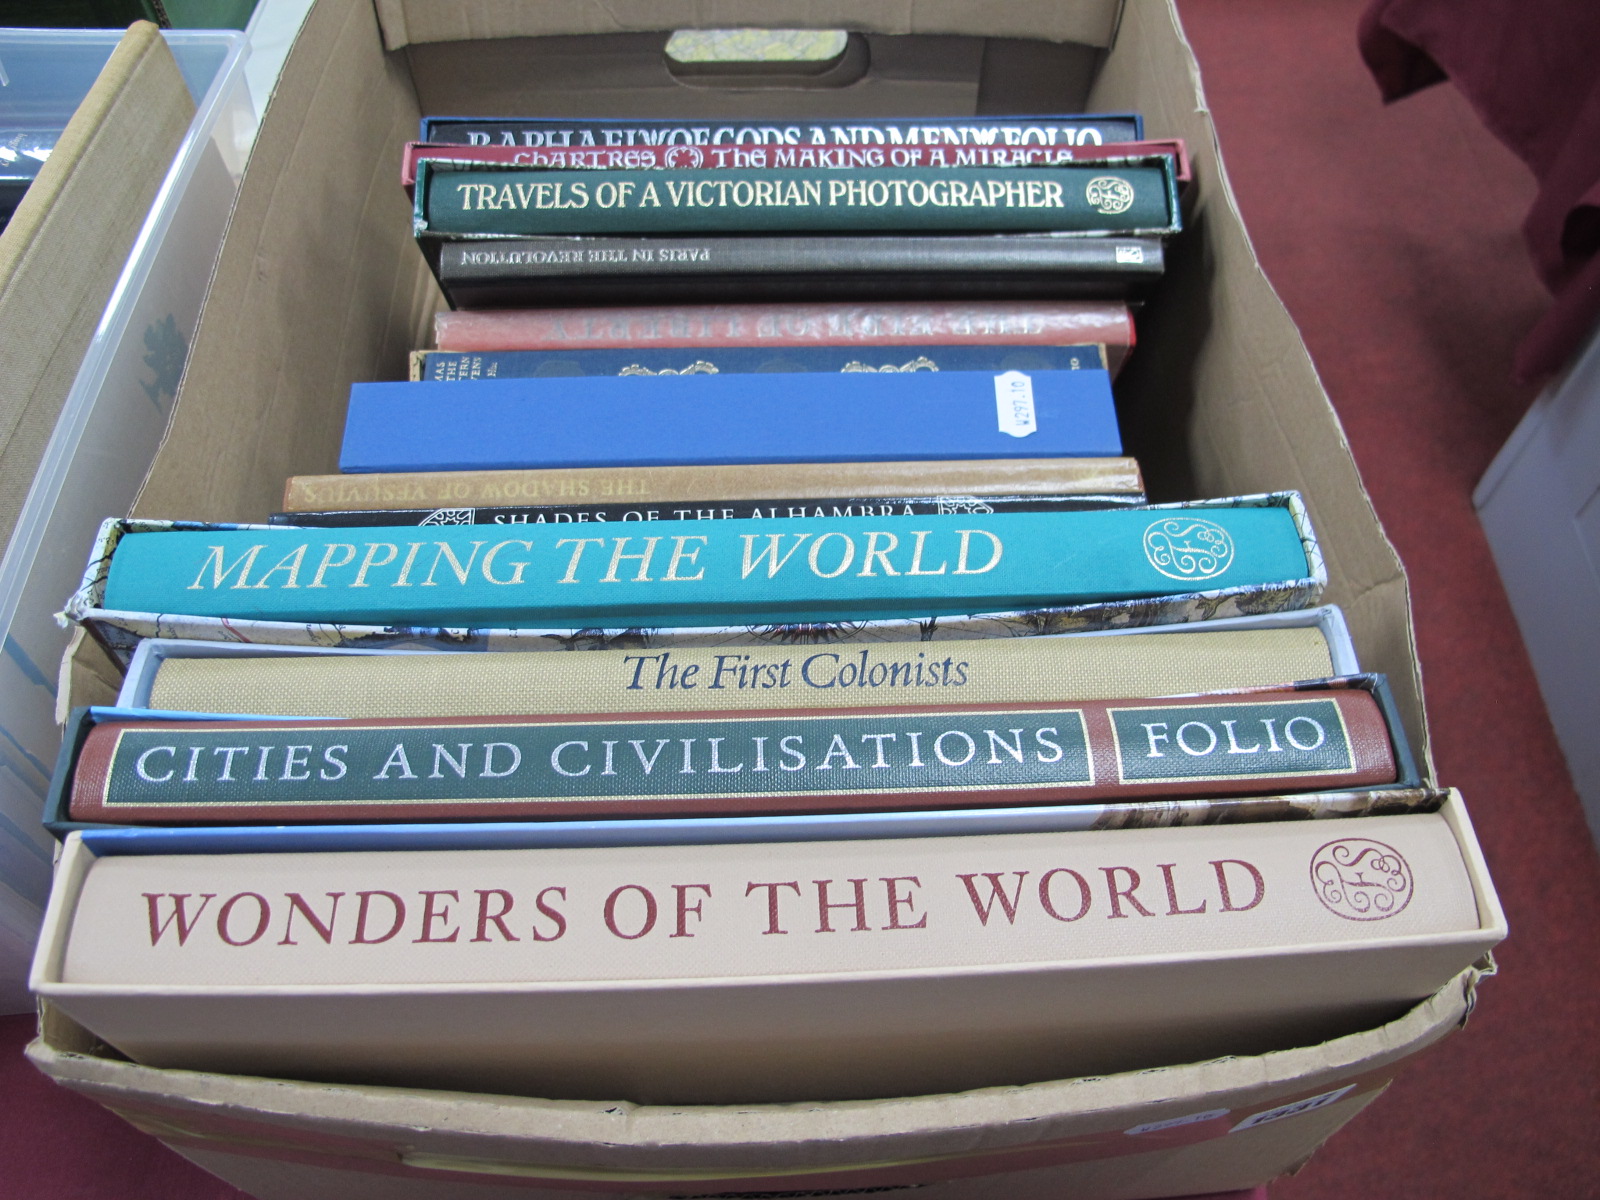 A Collection of Travel and Related Folio Society Editions, including Mapping the World, Wonders of